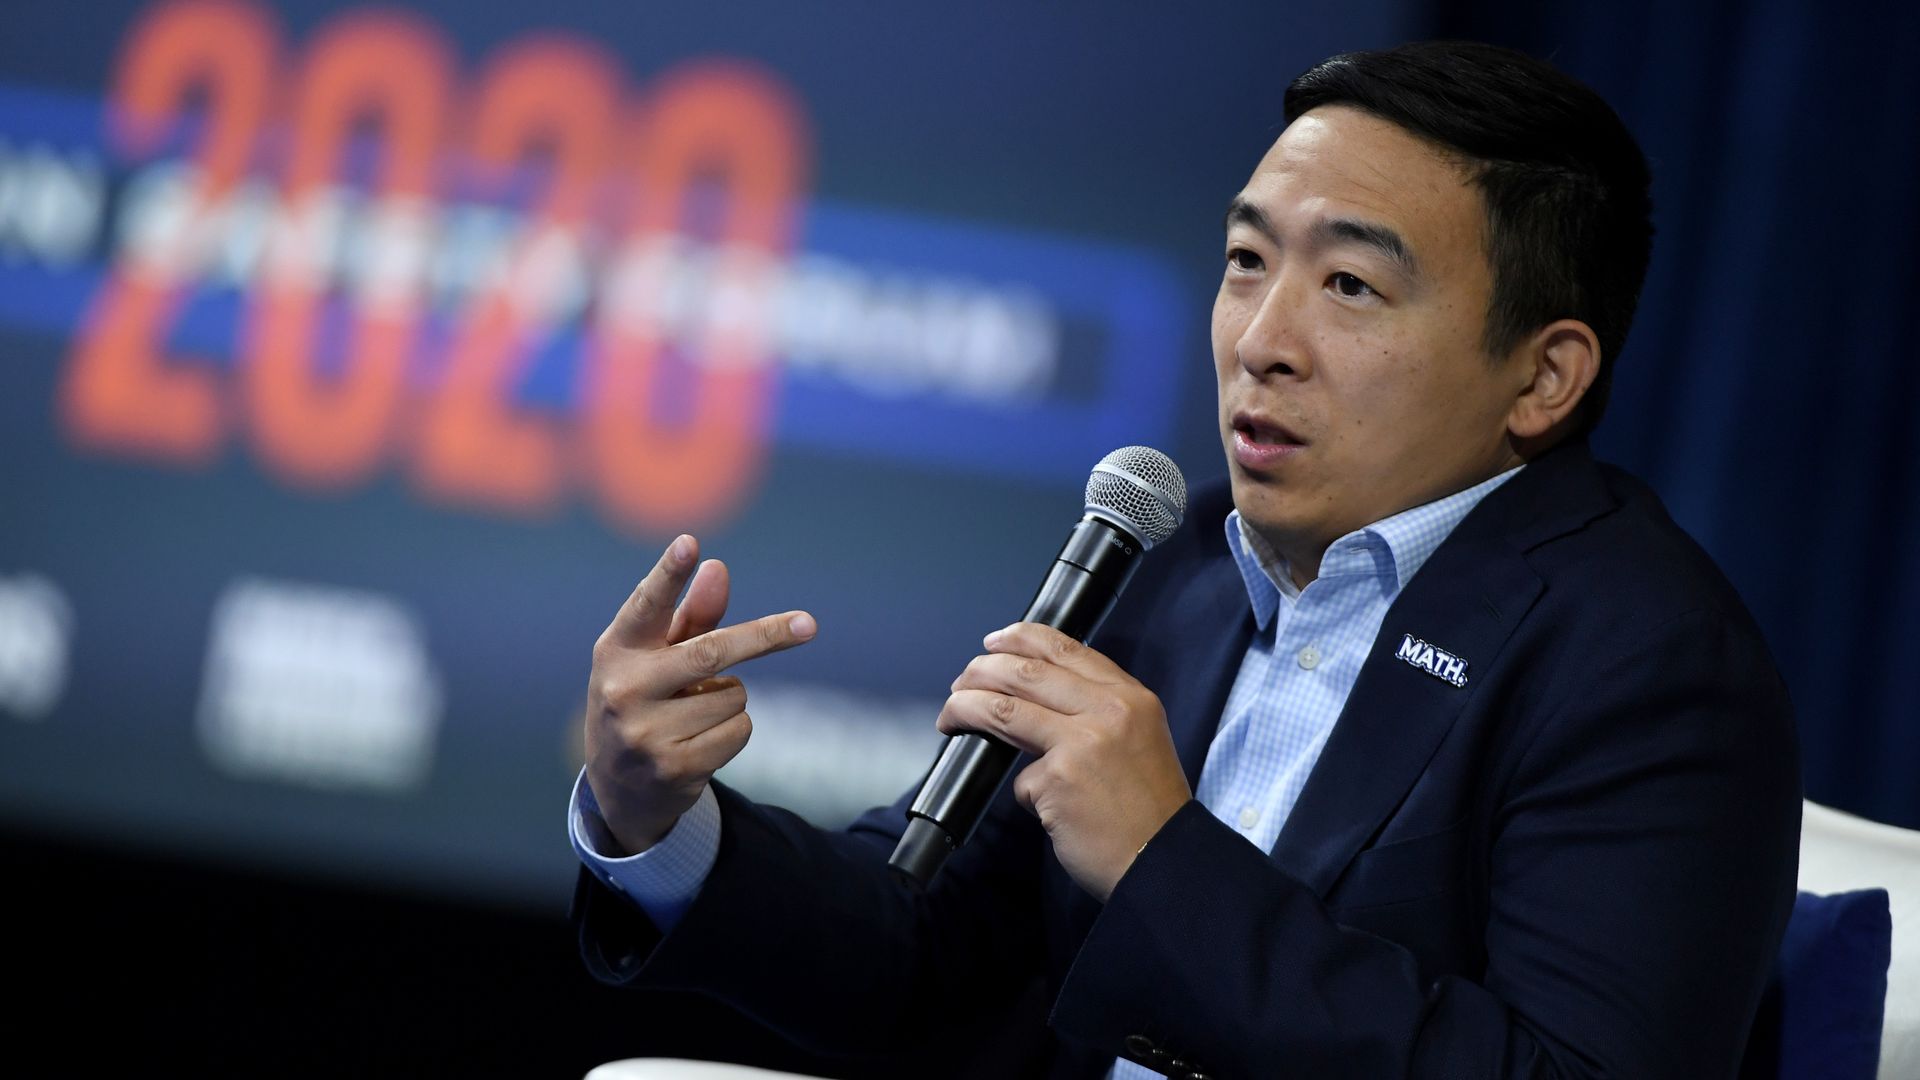 Former Democratic presidential candidate Andrew Yang speaks during the 2020 Gun Safety Forum on October 2, 2019 in Las Vegas, Nevada. 